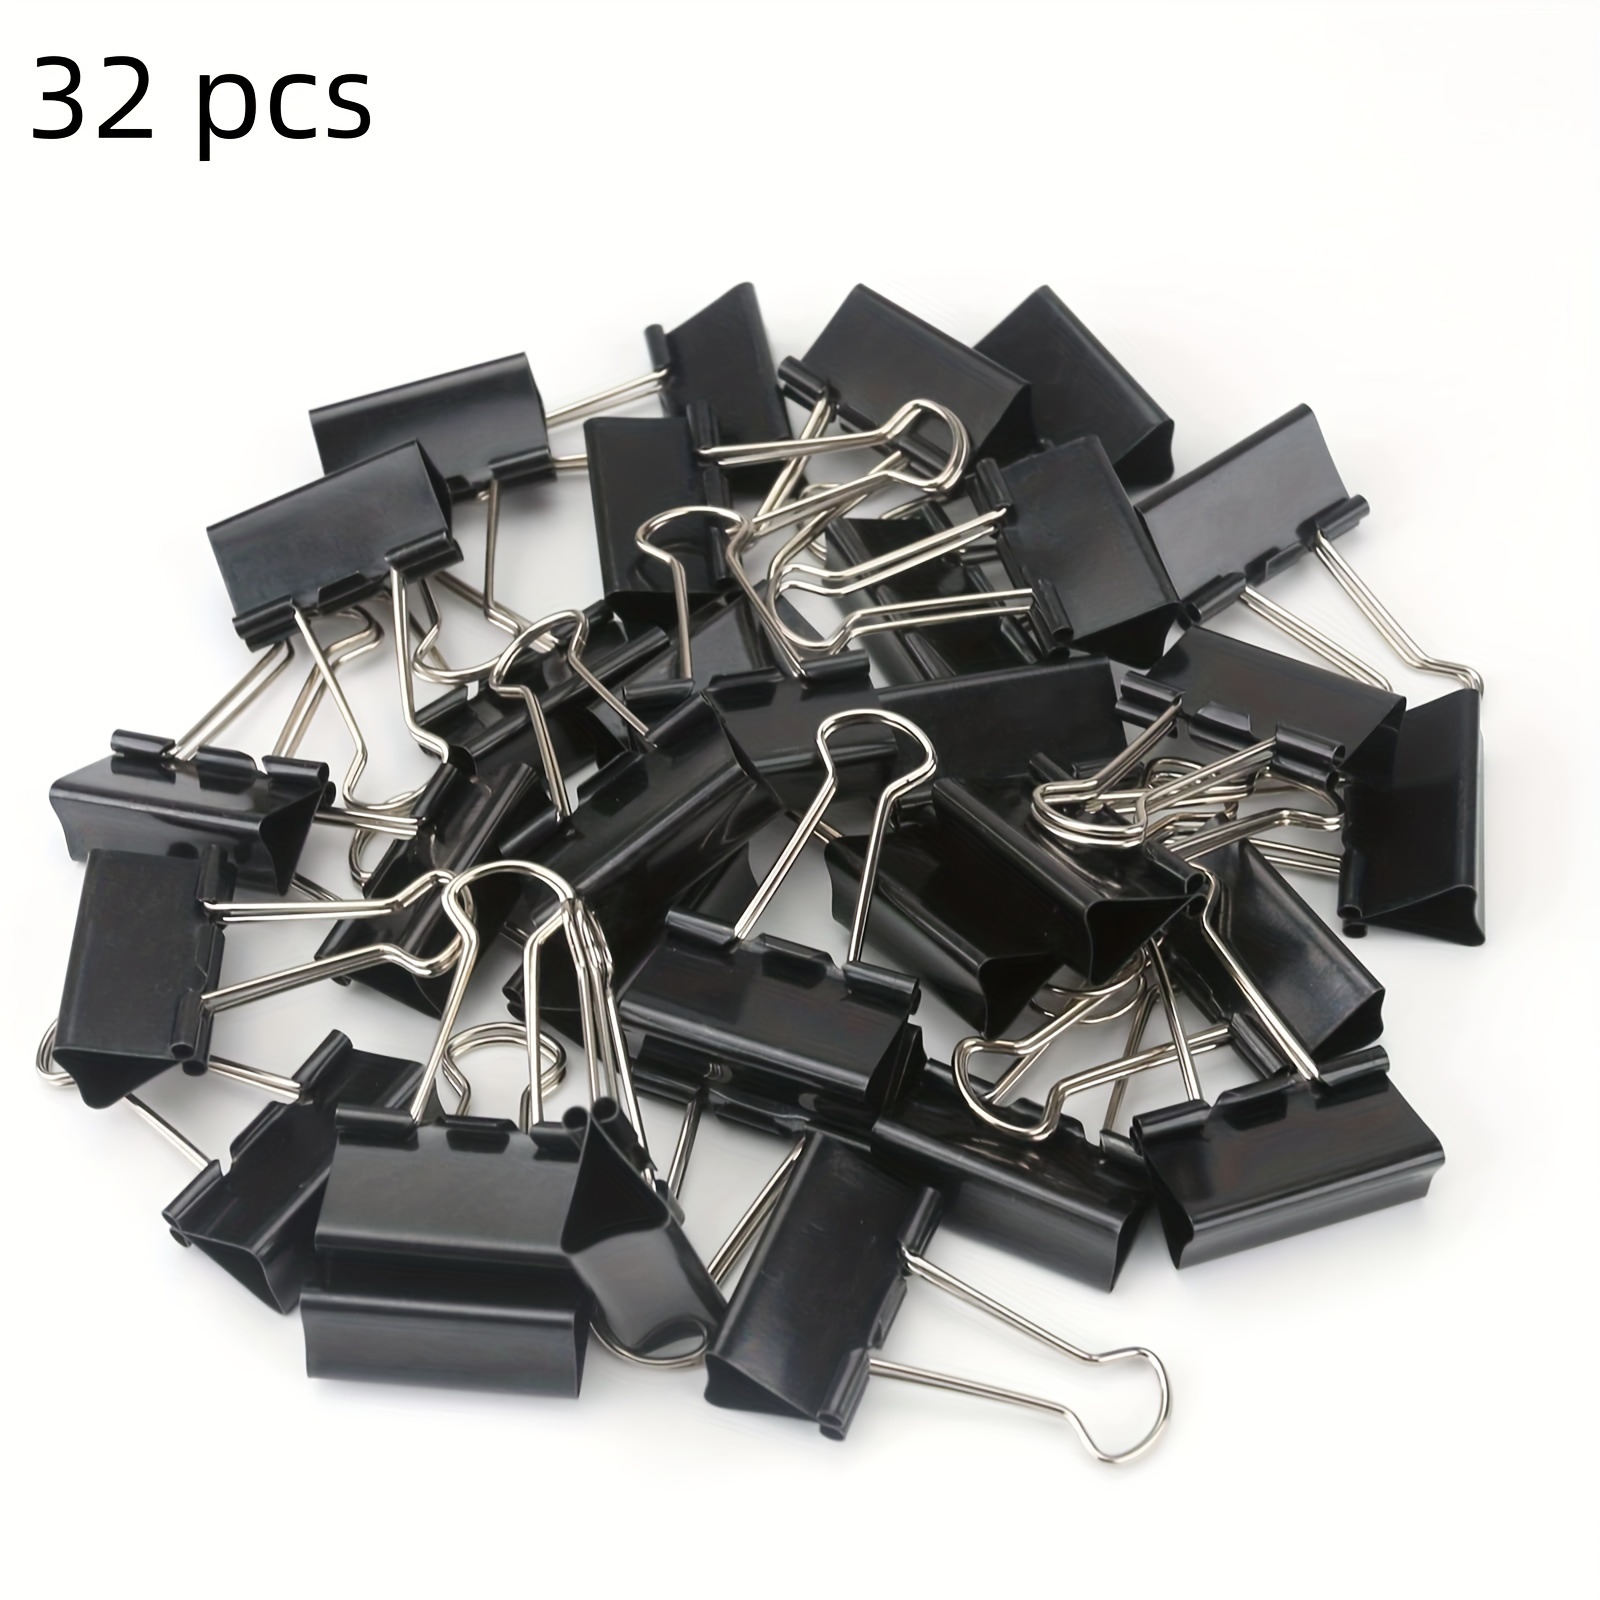 Large Binder Clips 1.6inch (24 Pack), Big Paper Clamps Clips For Office  Supplies, 1.6inch/41mm Width, 0.7inch/18mm Capacity, Black